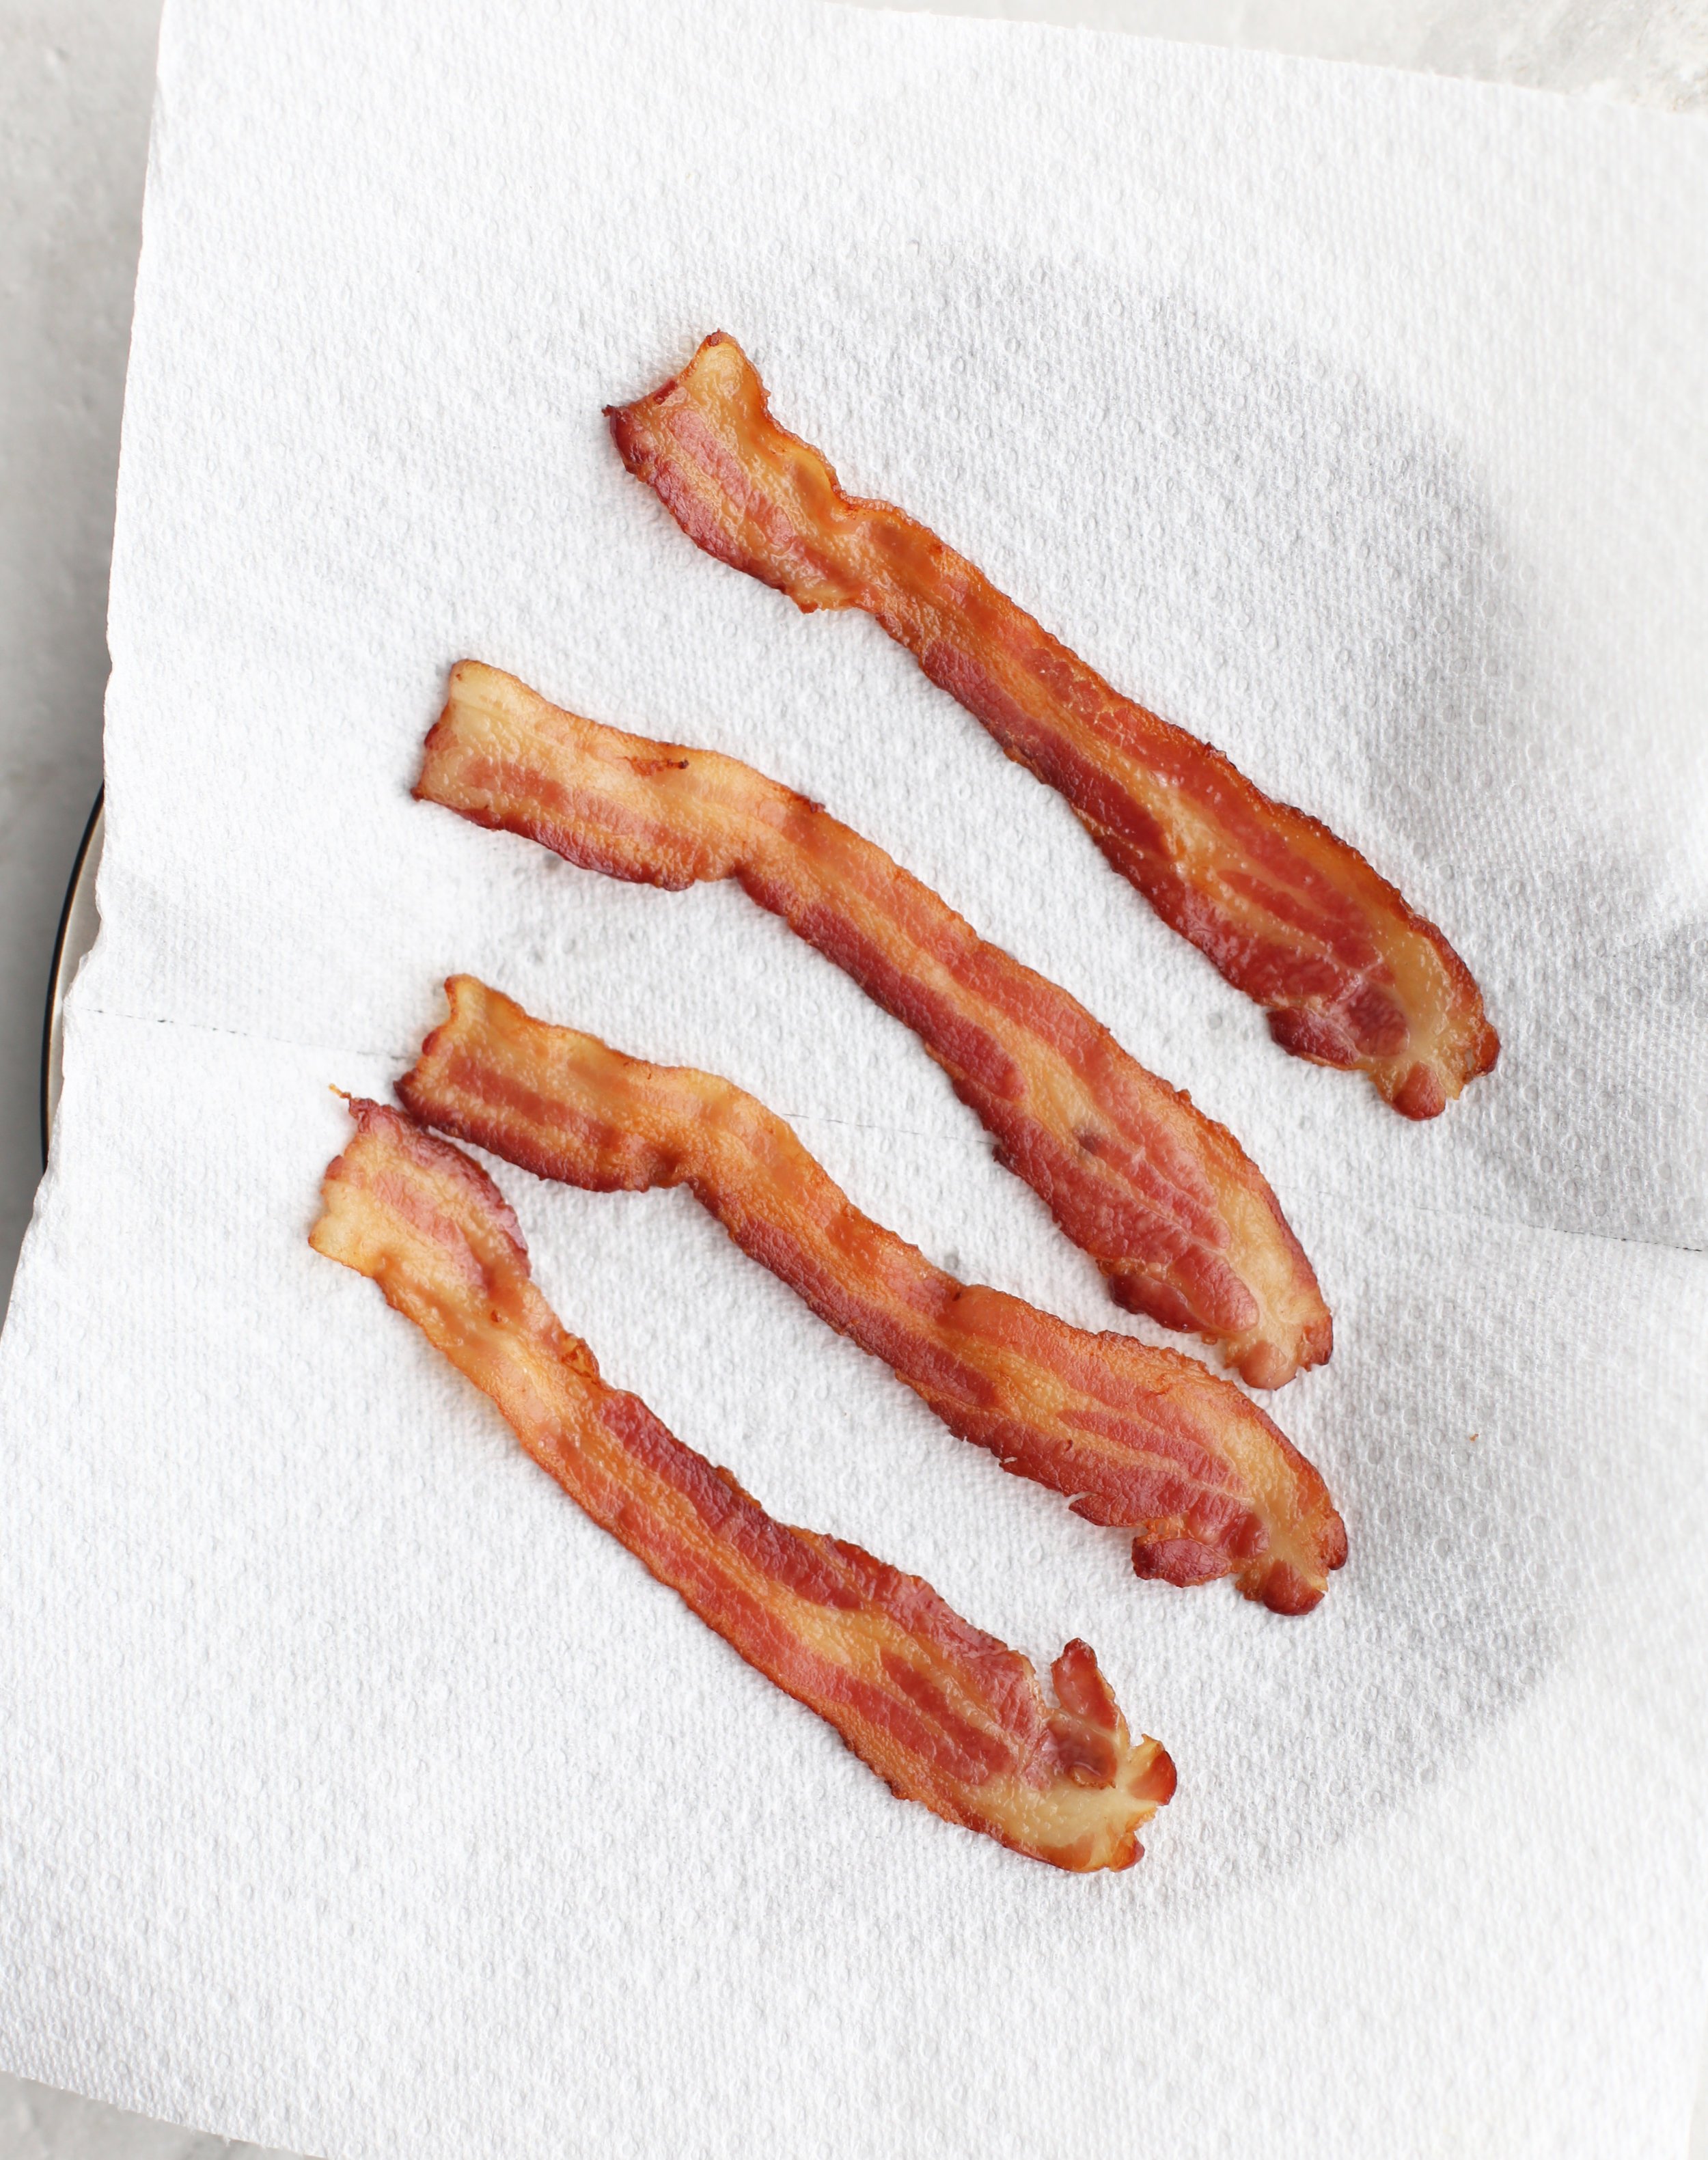 Four crispy strips of bacon on a white paper towel.